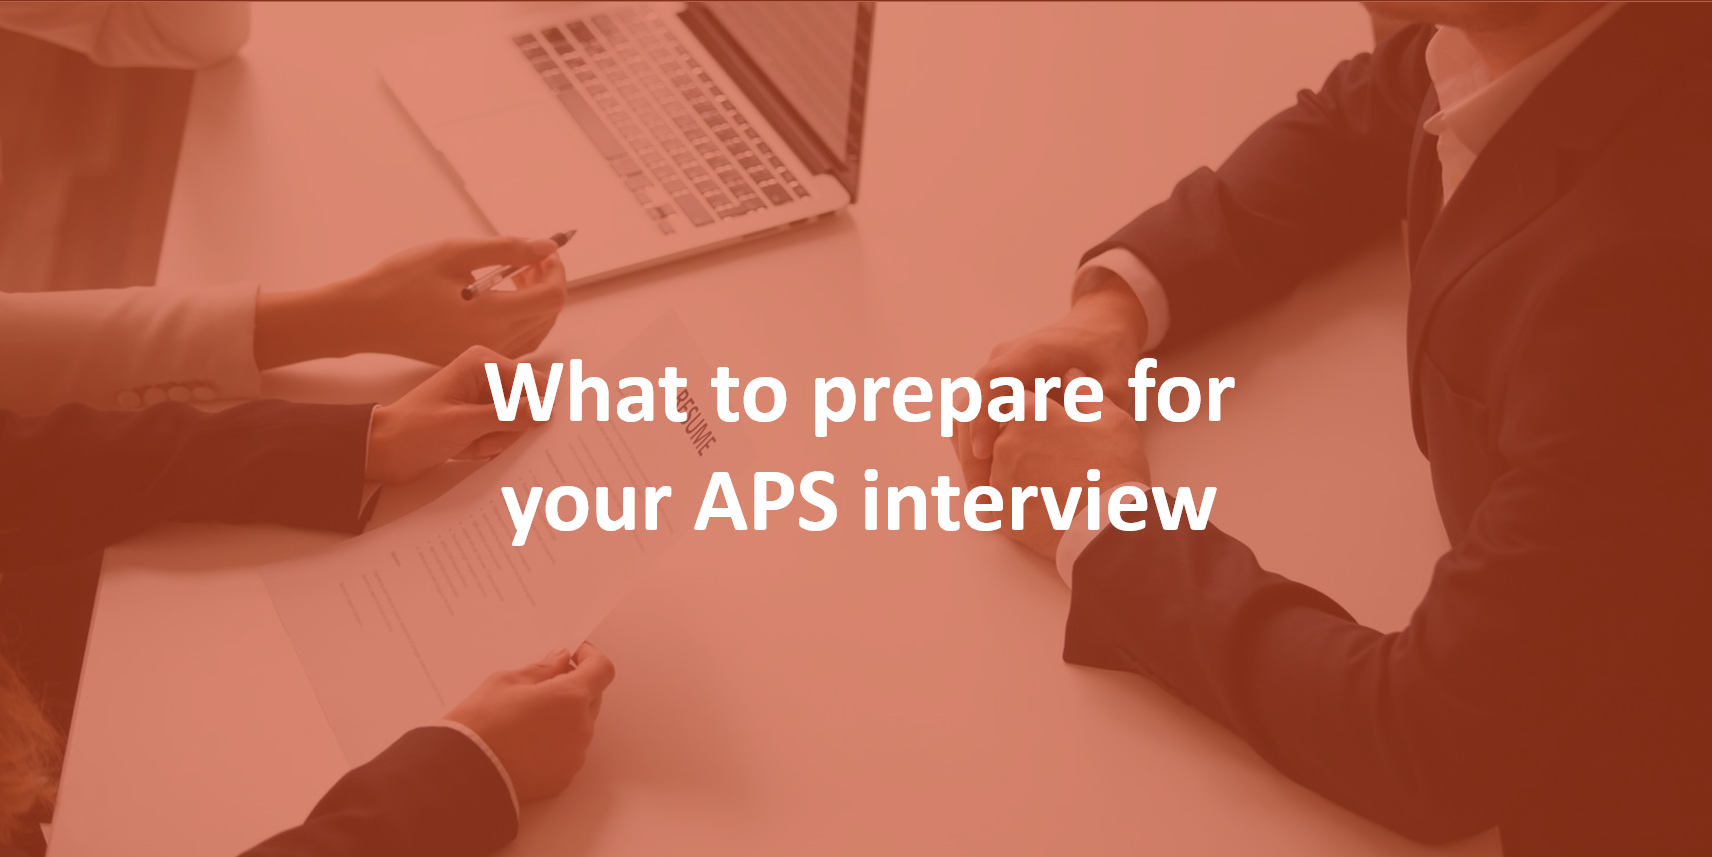 What to prepare for your APS interview